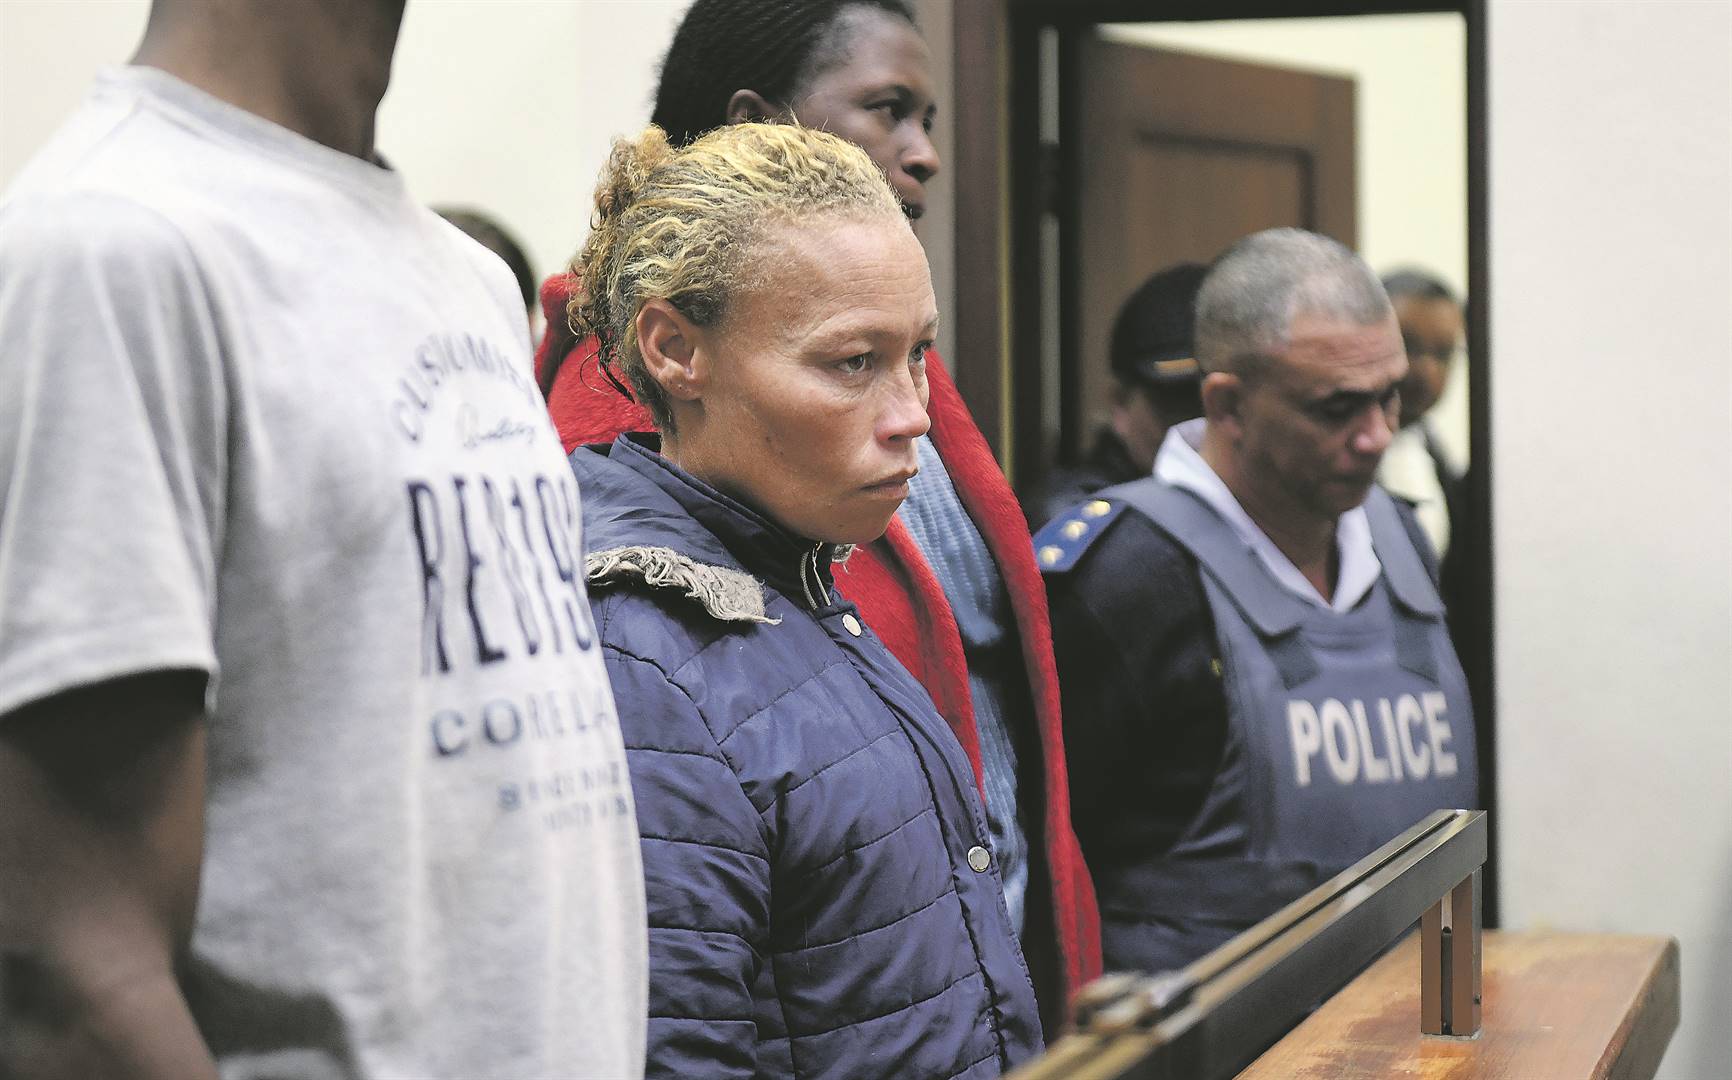 Kelly Smith, mother of missing Joshlin Smith (6) appeared in court this week with Jacquen Appollis, Steveno van Rhyn and Phumza Sigaqa. They all face charges of kidnapping and child trafficking